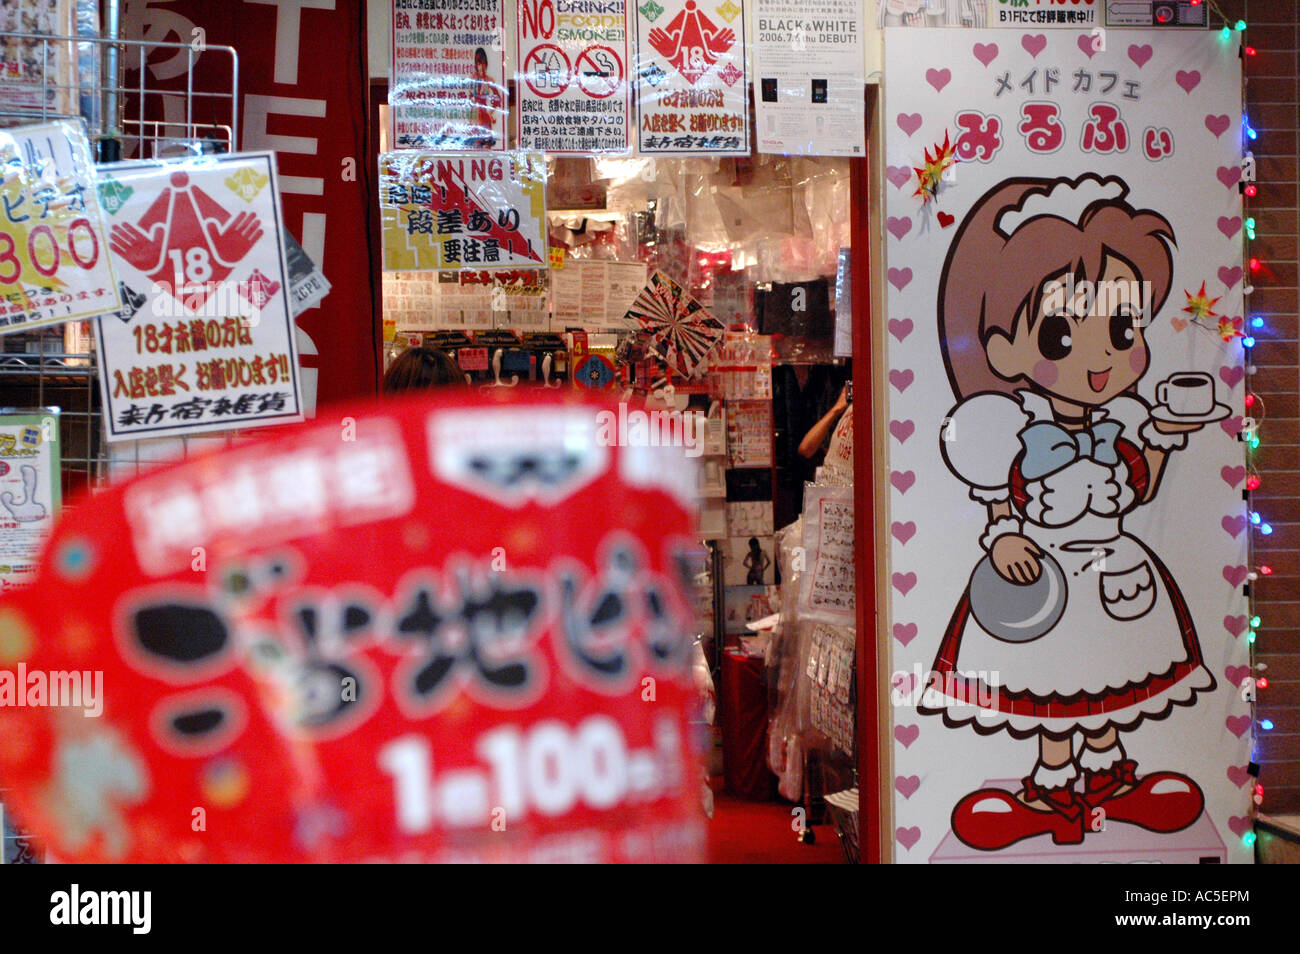 The entrance of a sex shop in Shinjuku, Tokyo Japan Stock Photo picture